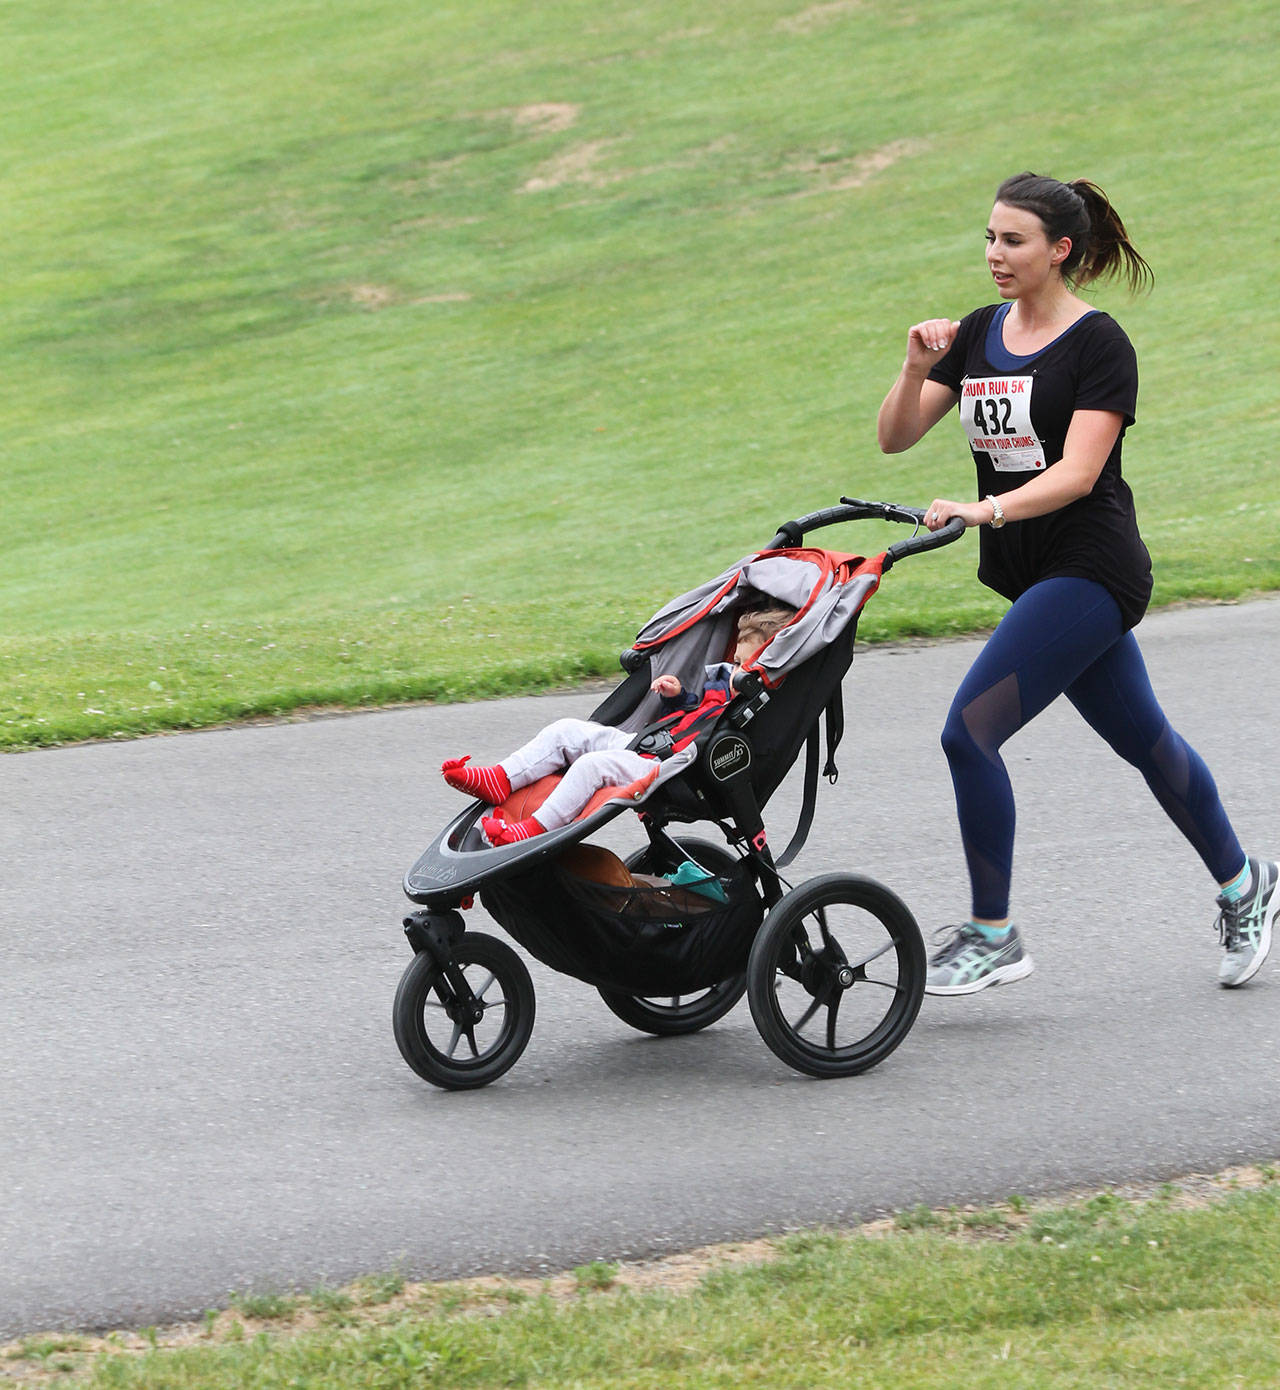 Shanea Trevino competes with son Edgar along for the ride.(Photo by Jim Waller/South Whidbey Record)